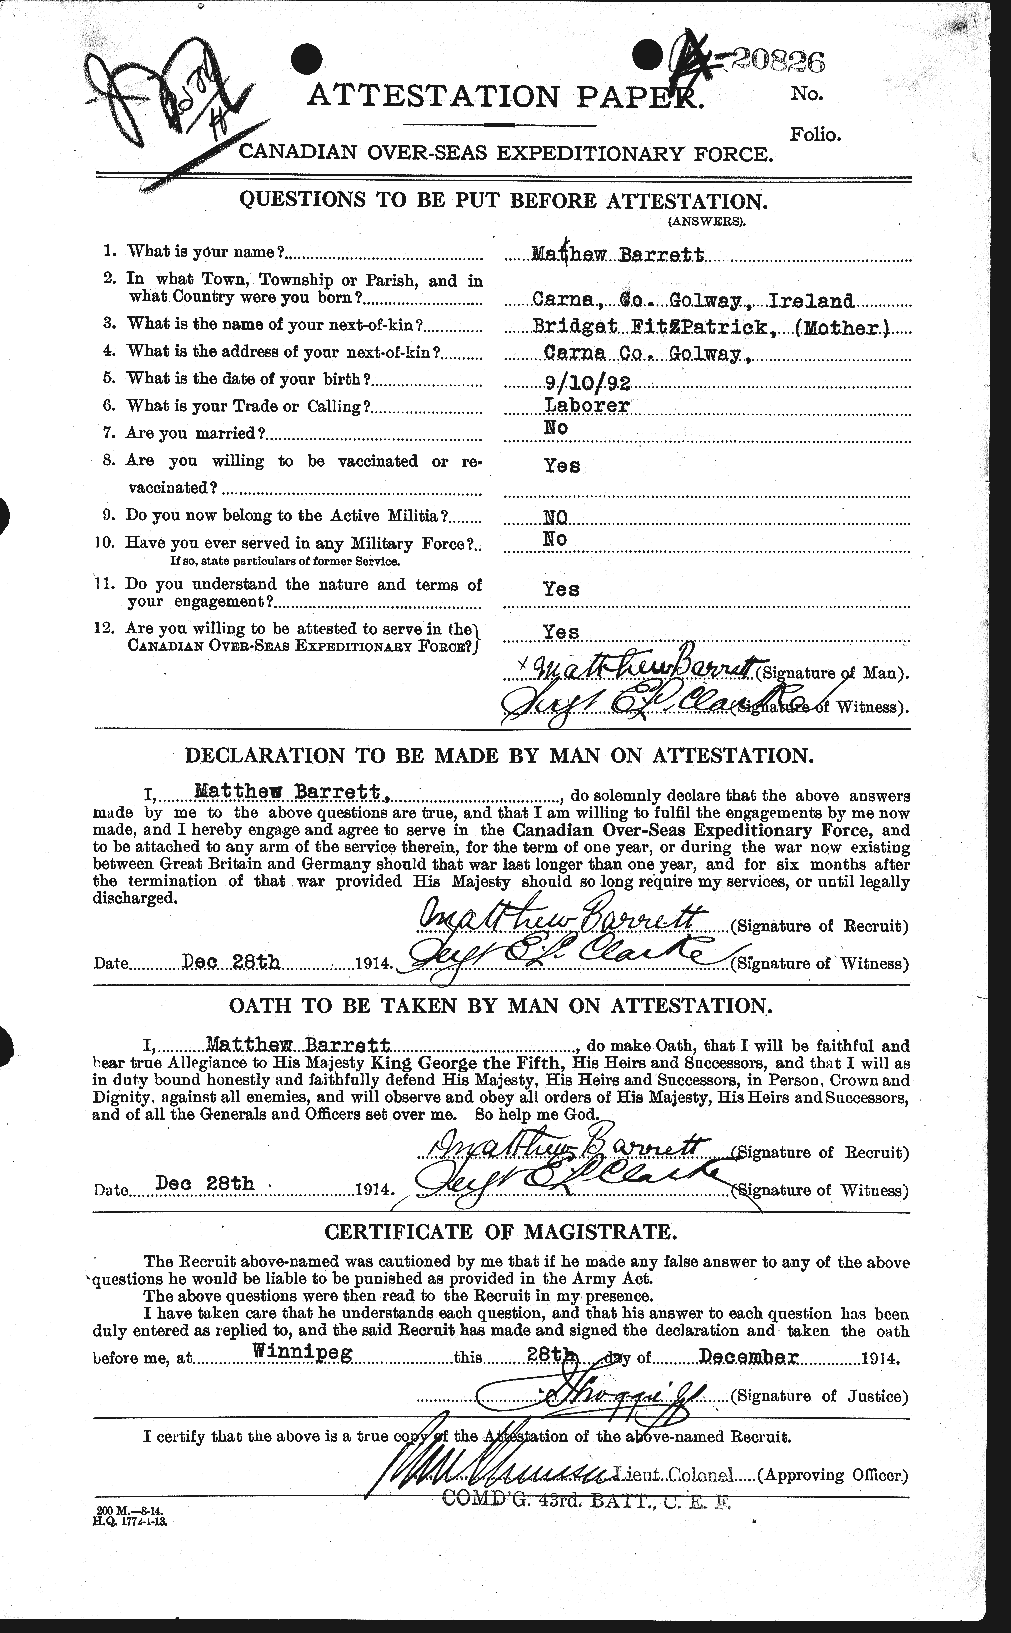 Personnel Records of the First World War - CEF 220218a